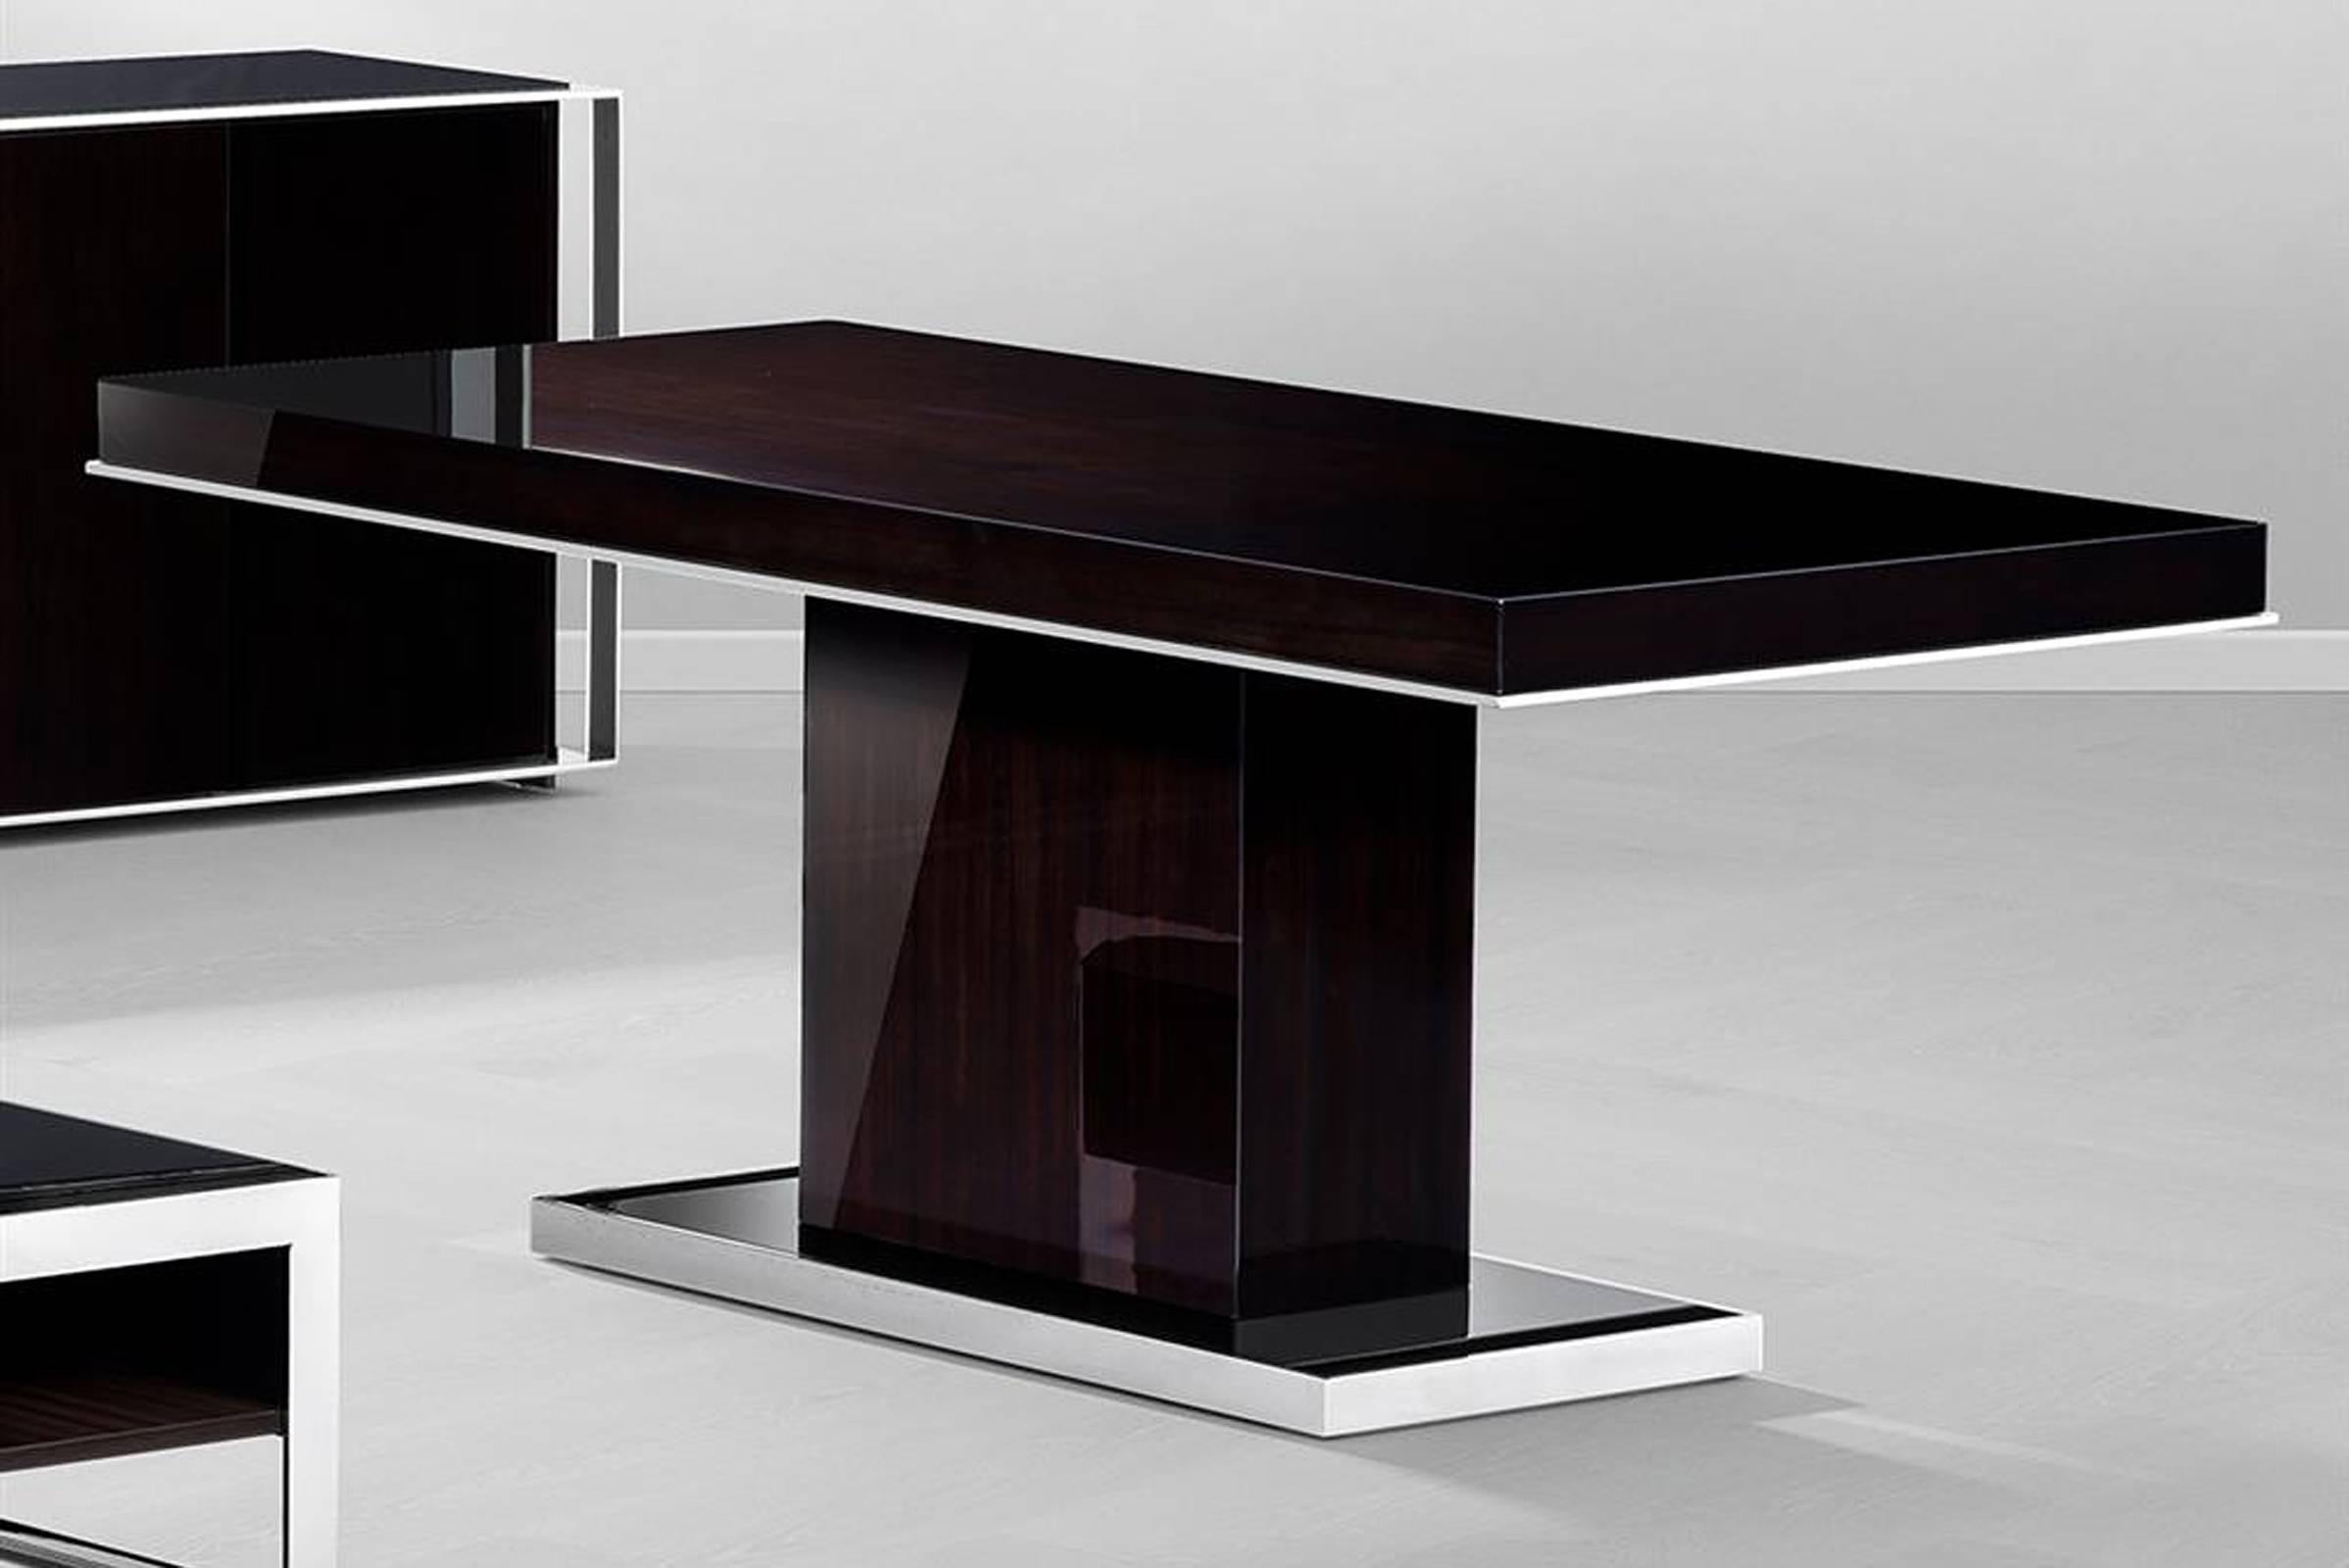 Dining table Chicago in high gloss ebony finish
and polished stainless steel.
